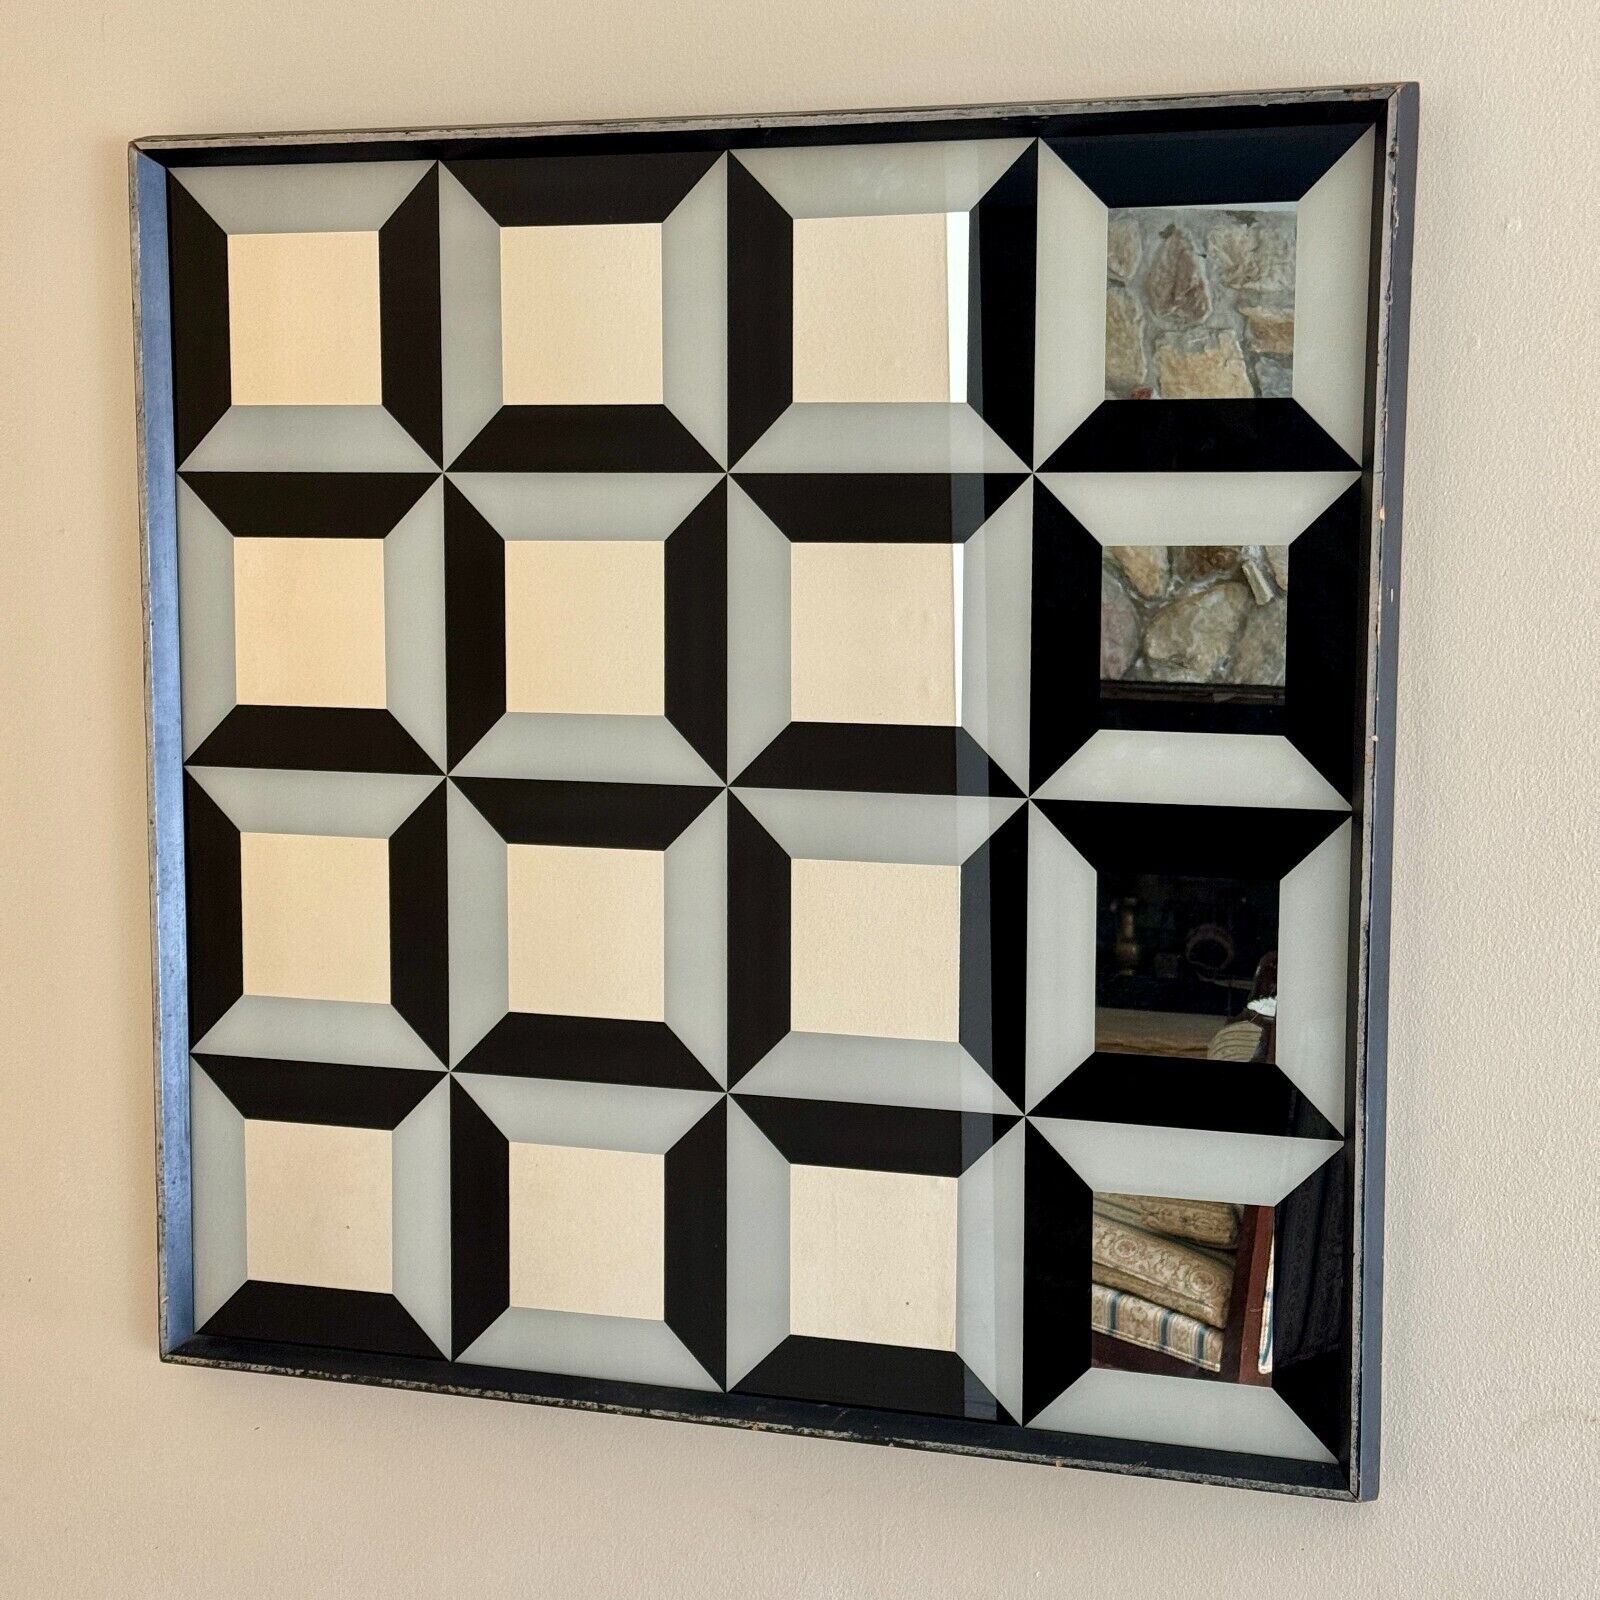 Turner Mfg Co Chicago Op Art Wall Mirror by Verner Panton in Black&White Square